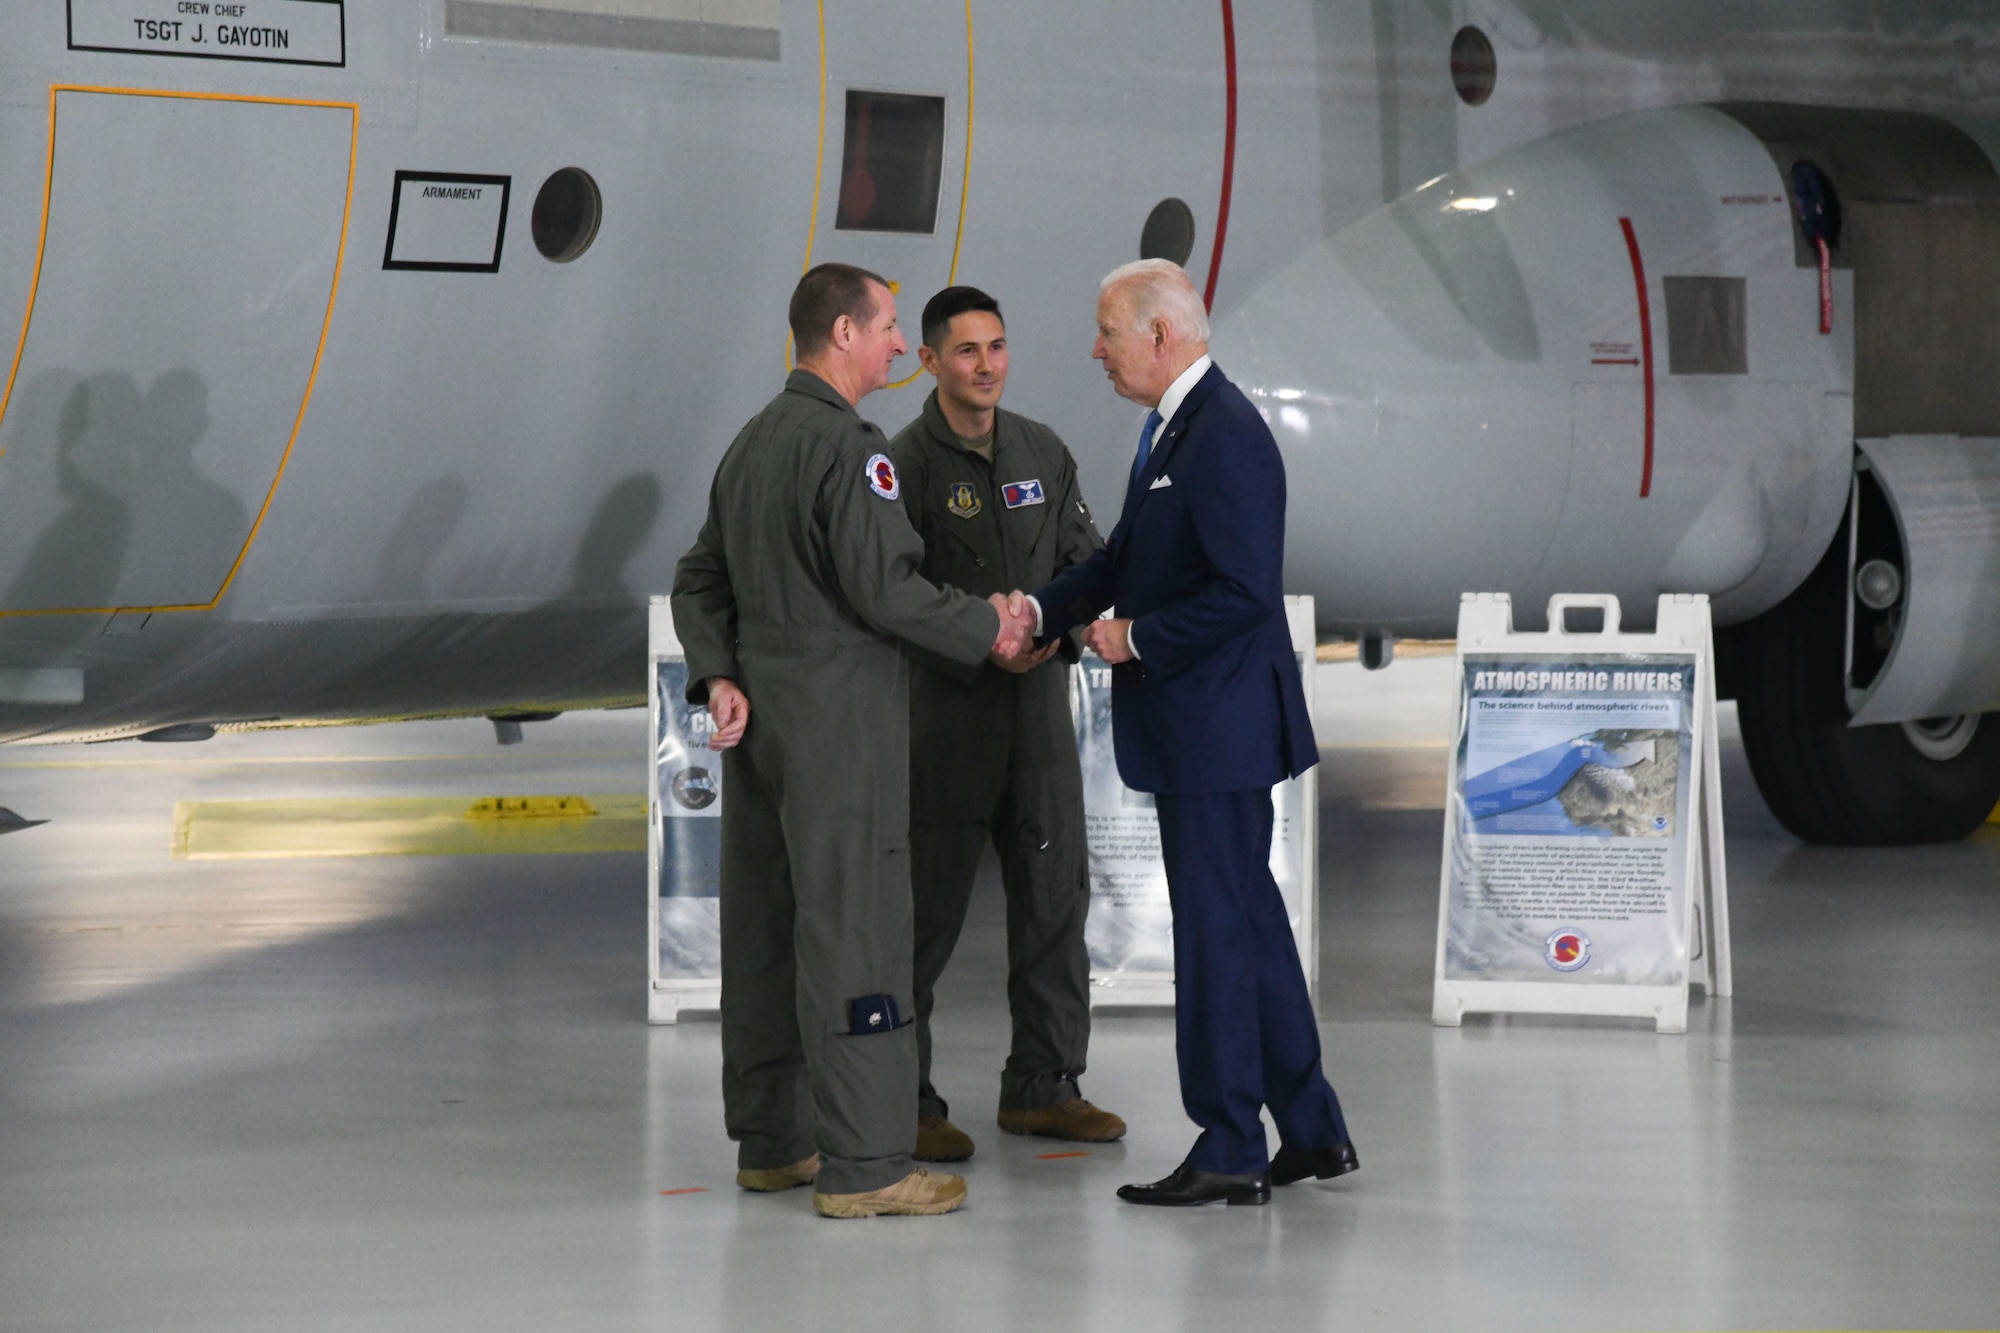 President Biden shakes Lt. Col. Olson's hand as Dehart looks on. A WC-130J aircraft is in the background